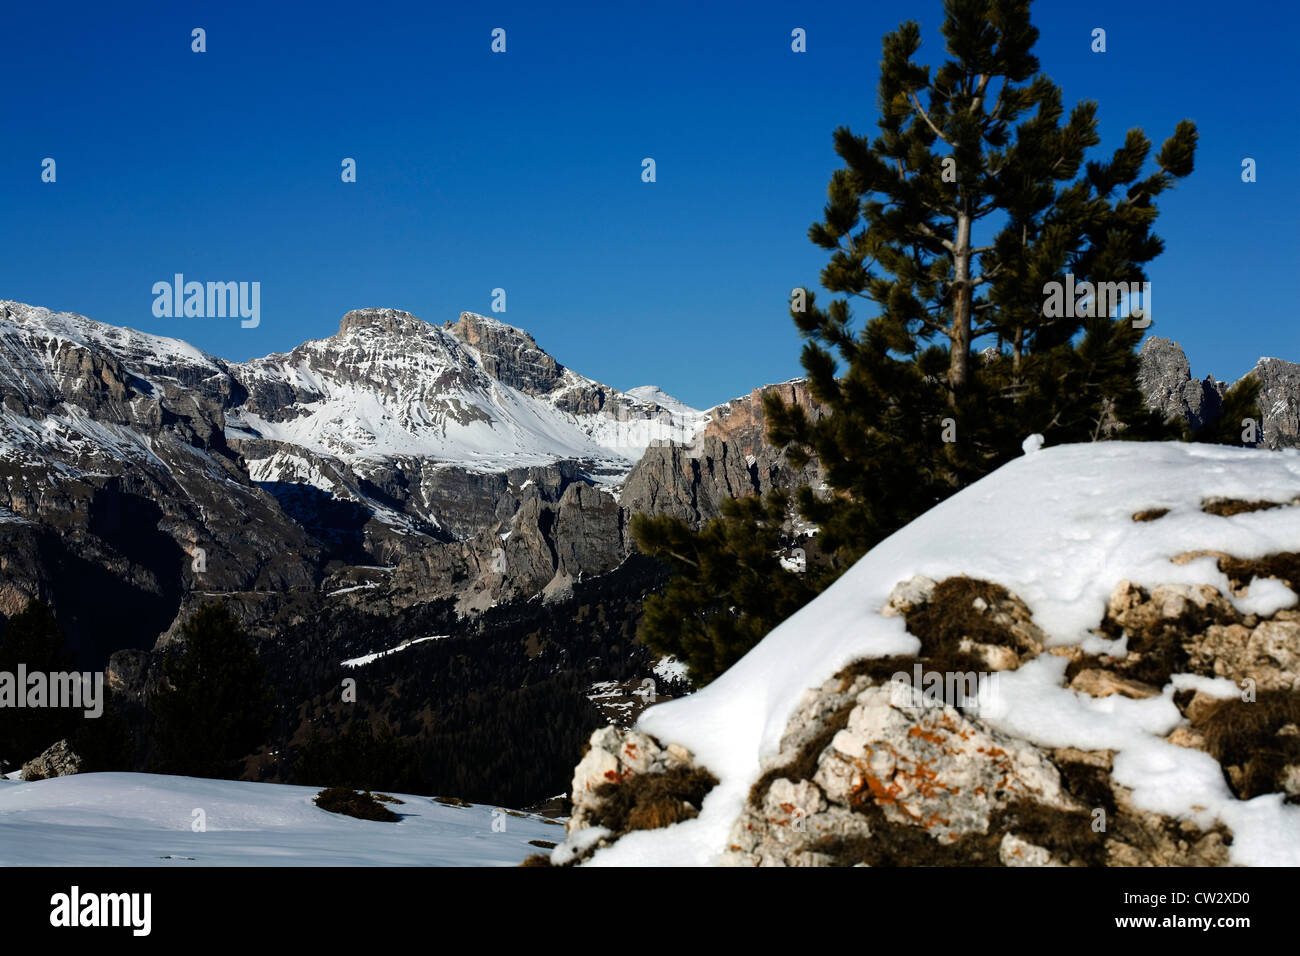 Cliff faces and frozen waterfalls above The Edelweisstal above Colfosco winter  between Selva and Corvara Dolomites Italy Stock Photo